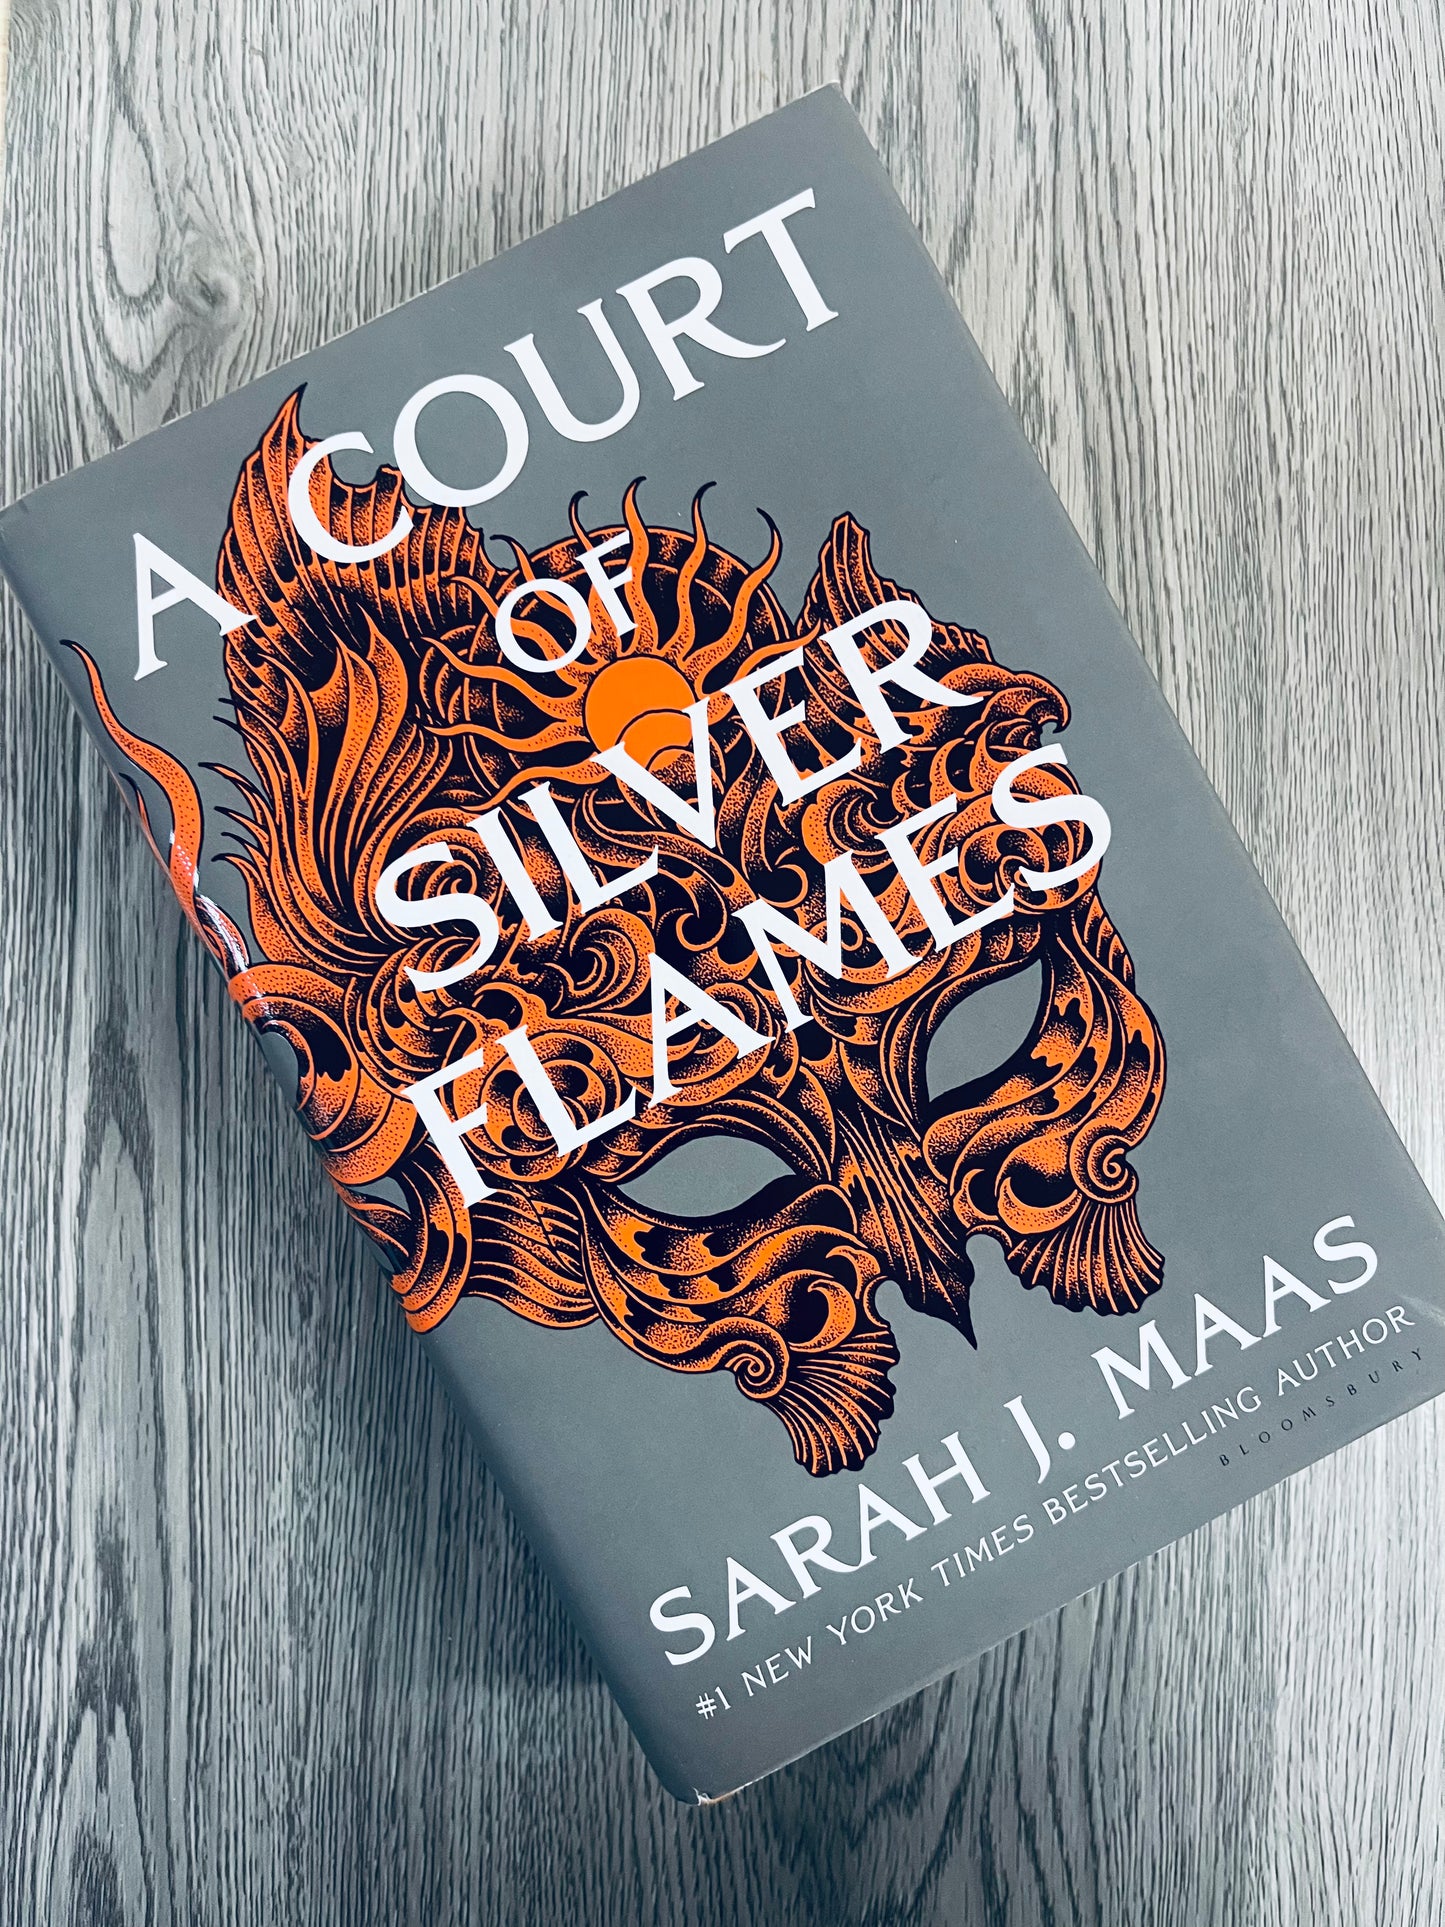 A Court Of Silver Flames (A Court of Thorns and Roses #4) by Sarah J. Maas